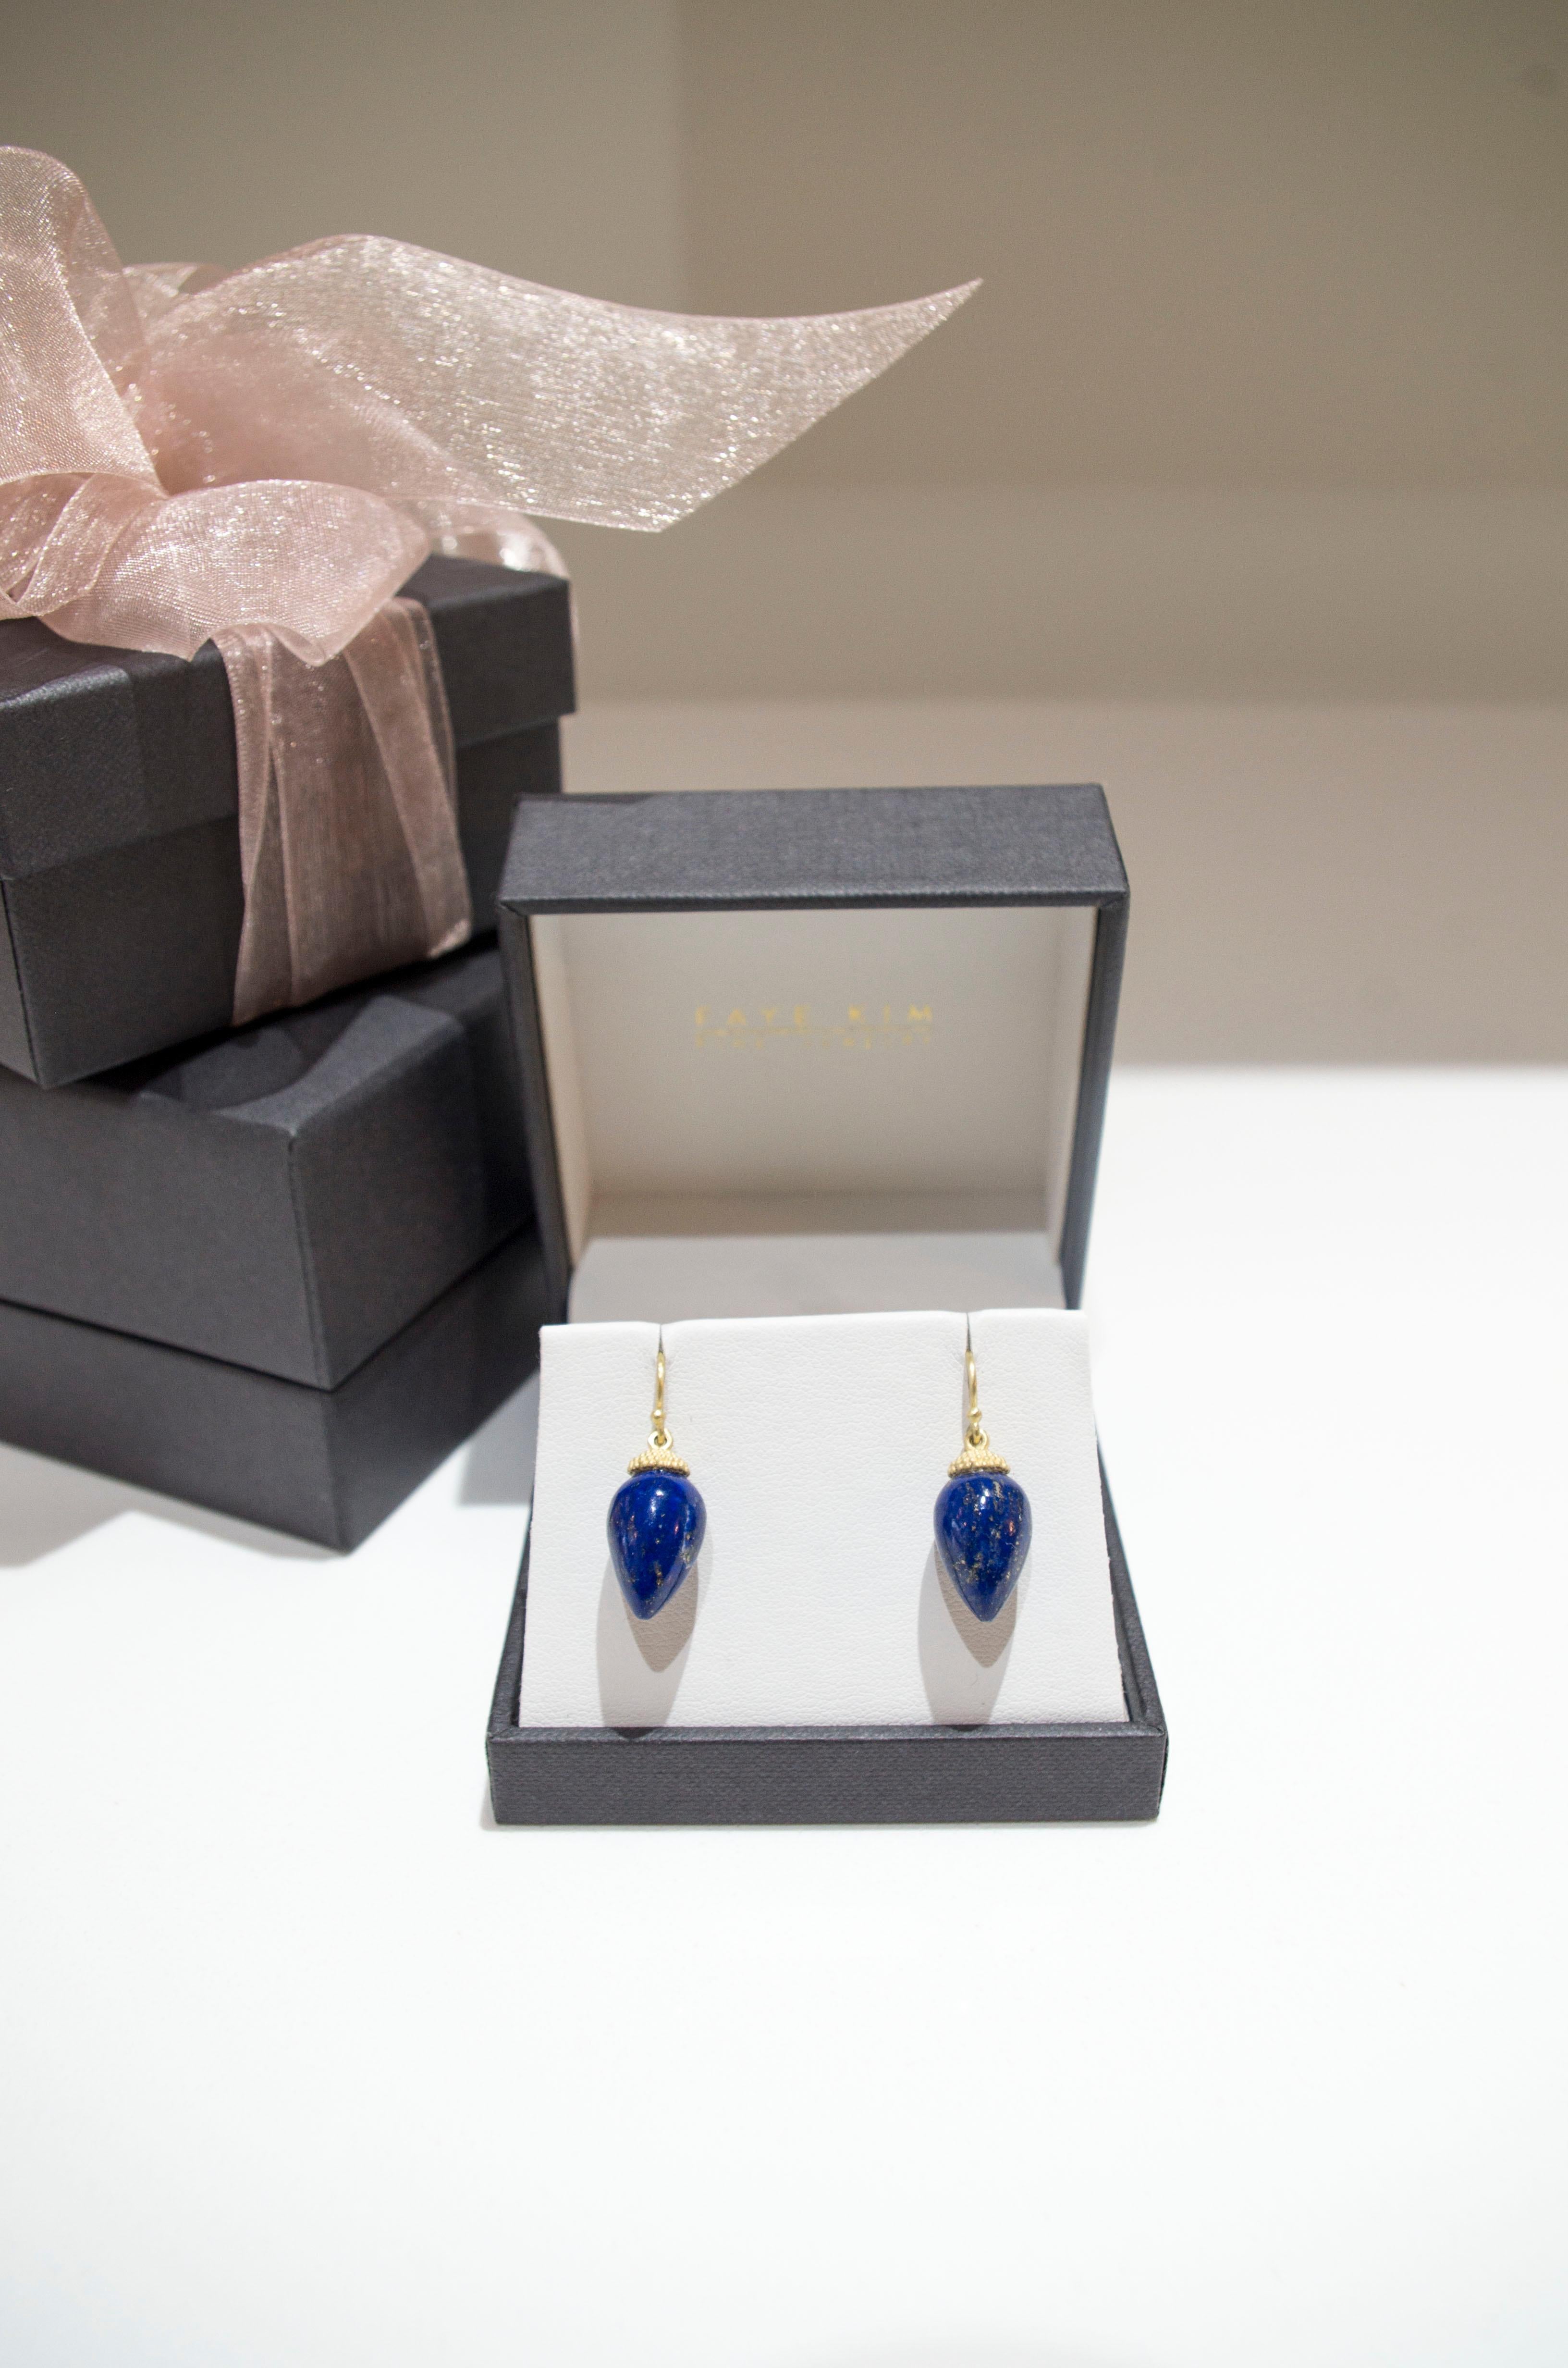 Faye Kim's vibrant 18 Karat Gold Lapis Acorn Drop Earrings are the perfect go-to earrings when you want a pop of color!  The acorn drops are finished with an 18k gold granulation cap and french ear wires.  

Length from top of granulation cap to